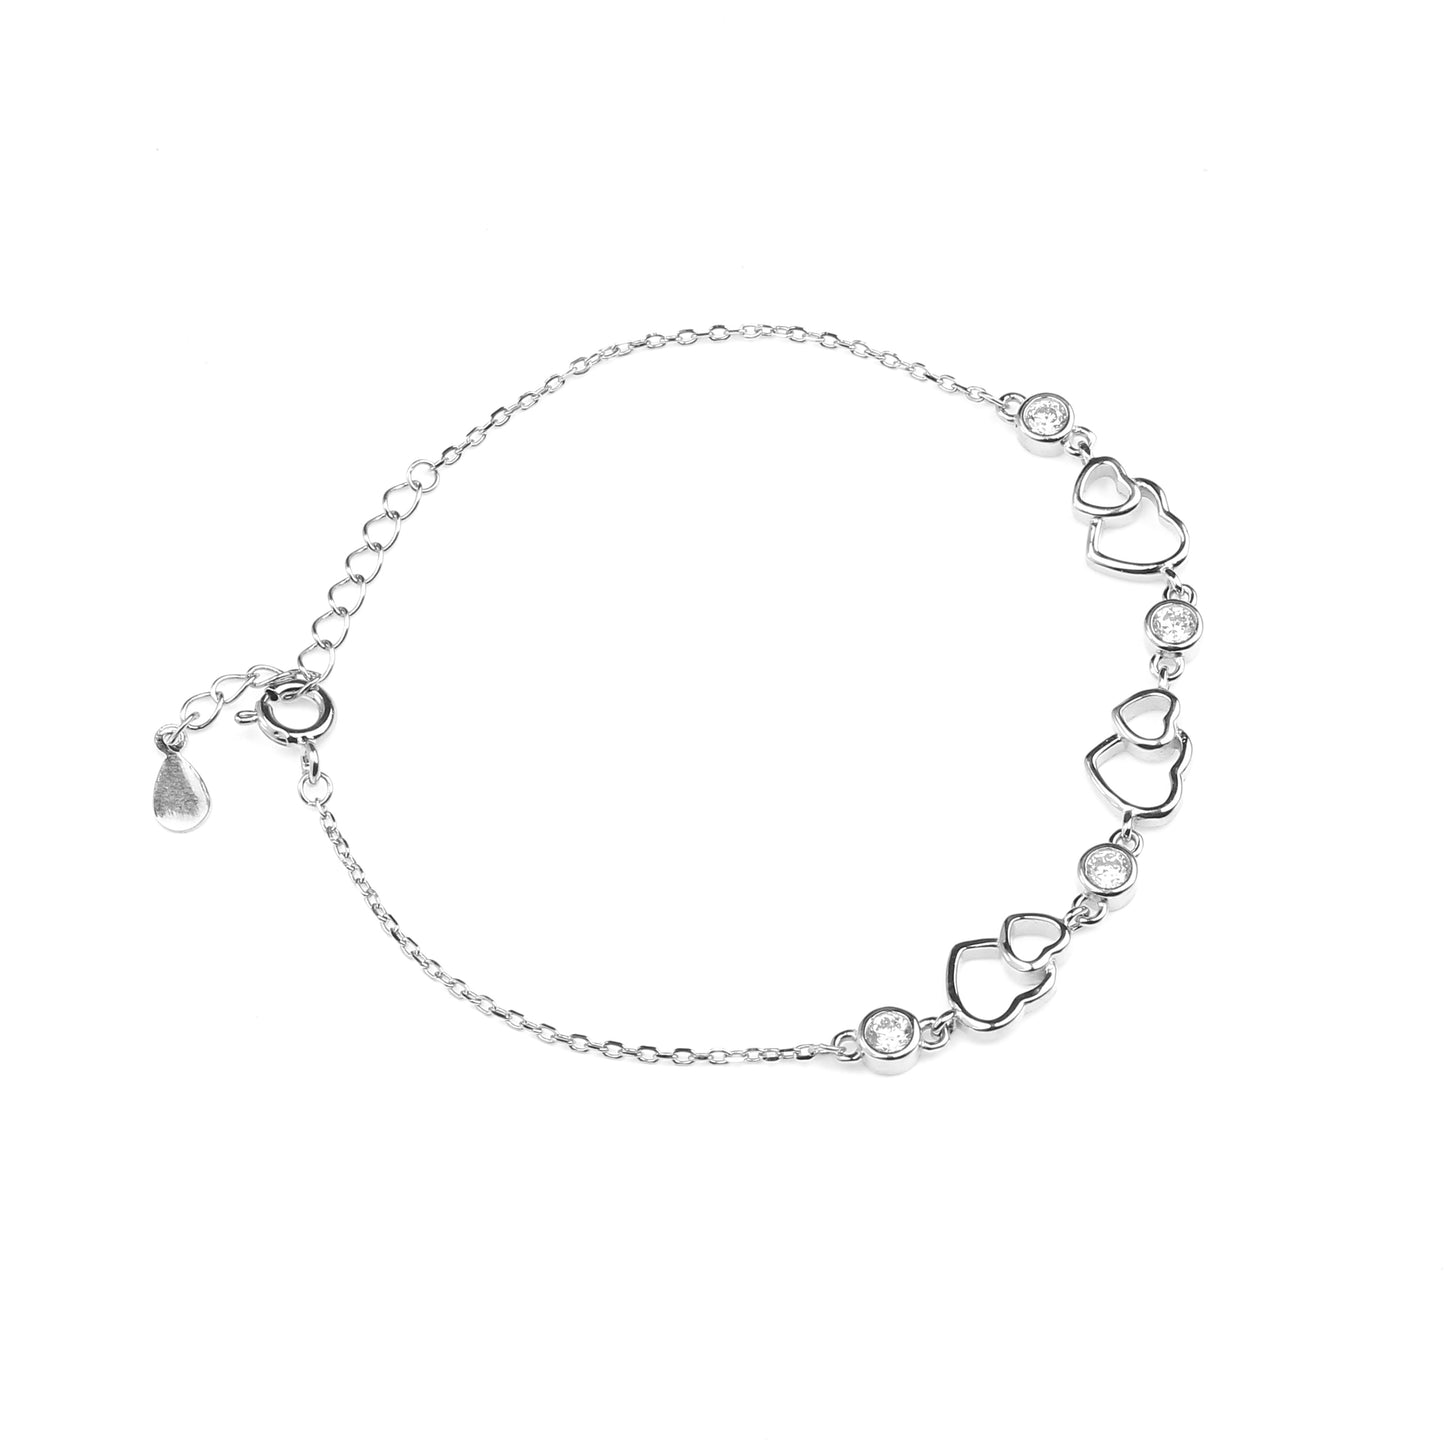 Heart link charms and white stone studded 925 sterling silver rose gold link bracelet with spring ring clasp